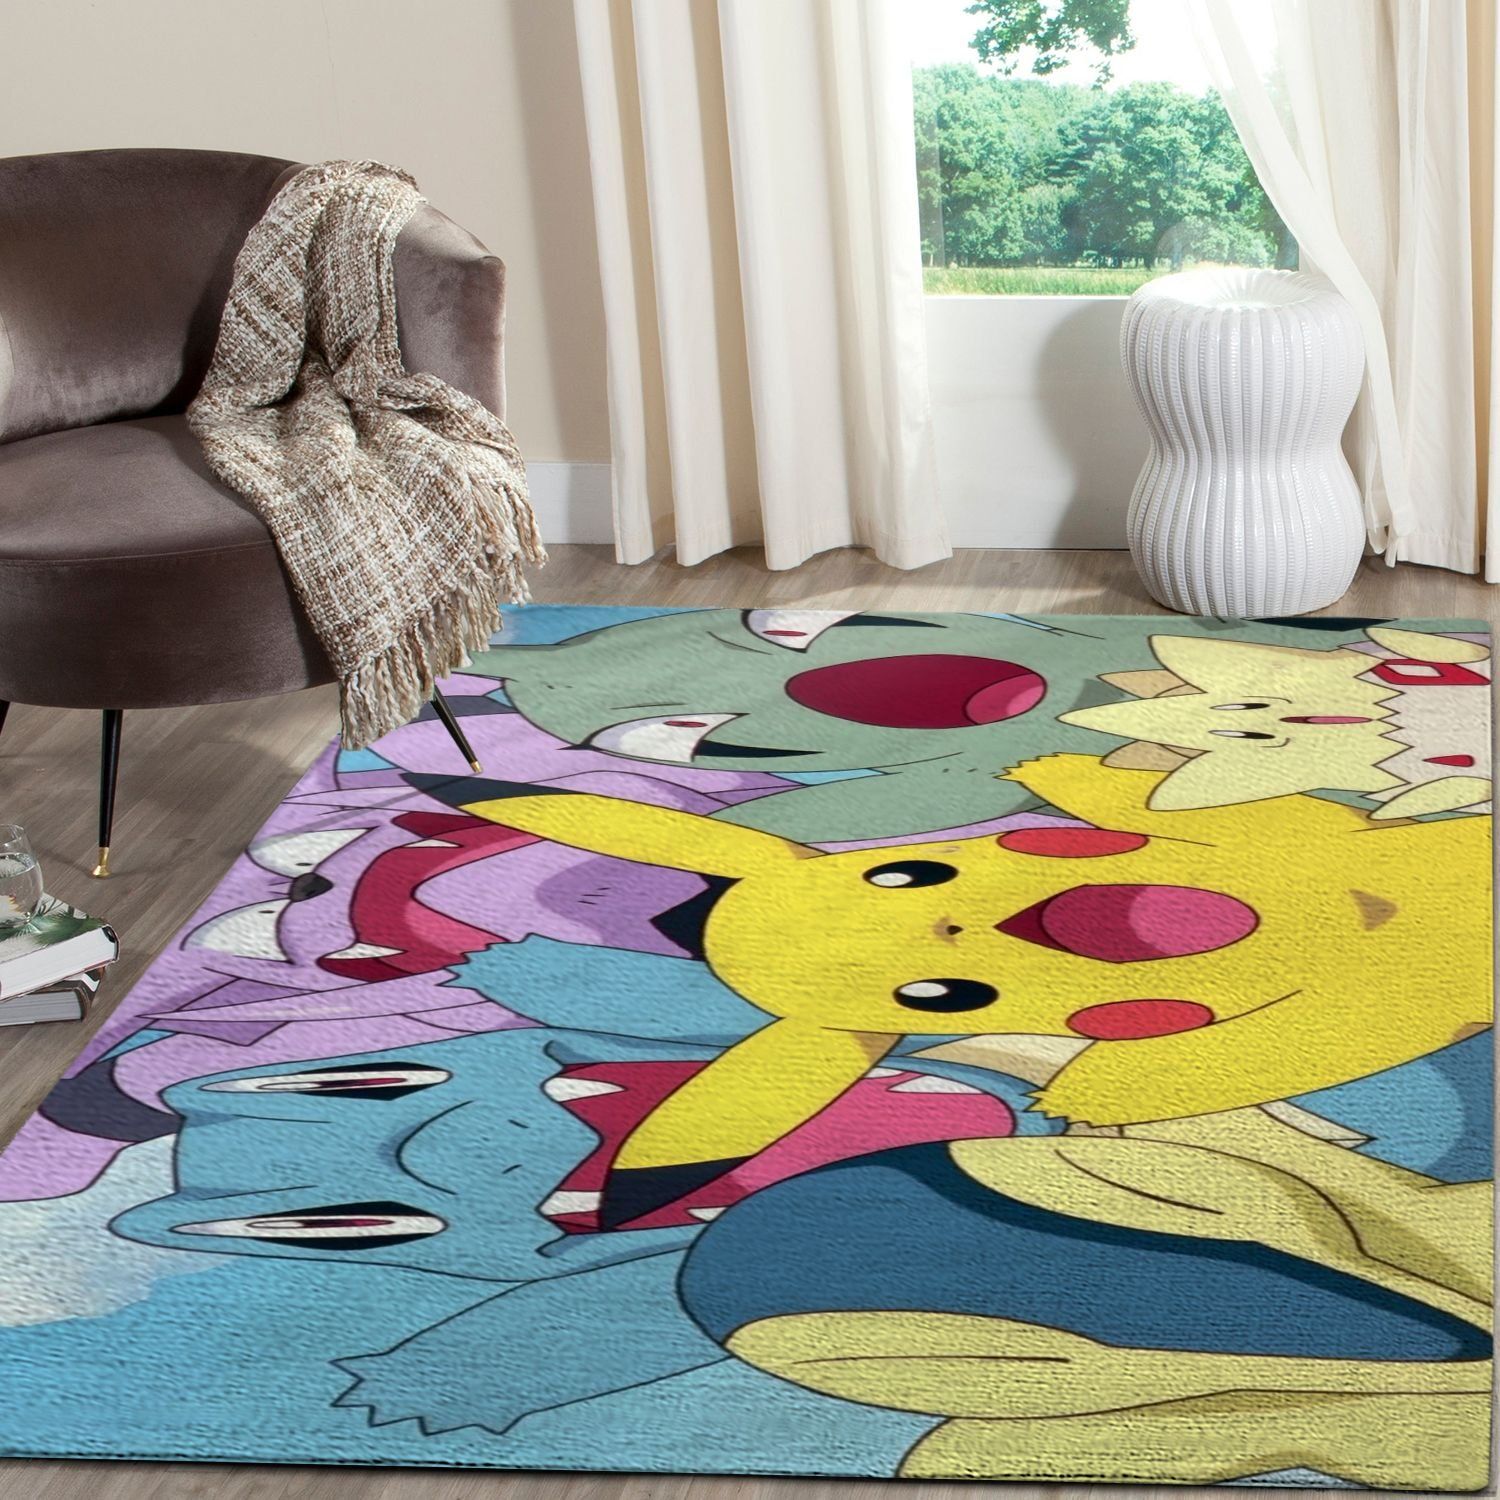 Pikachu and Friends rug